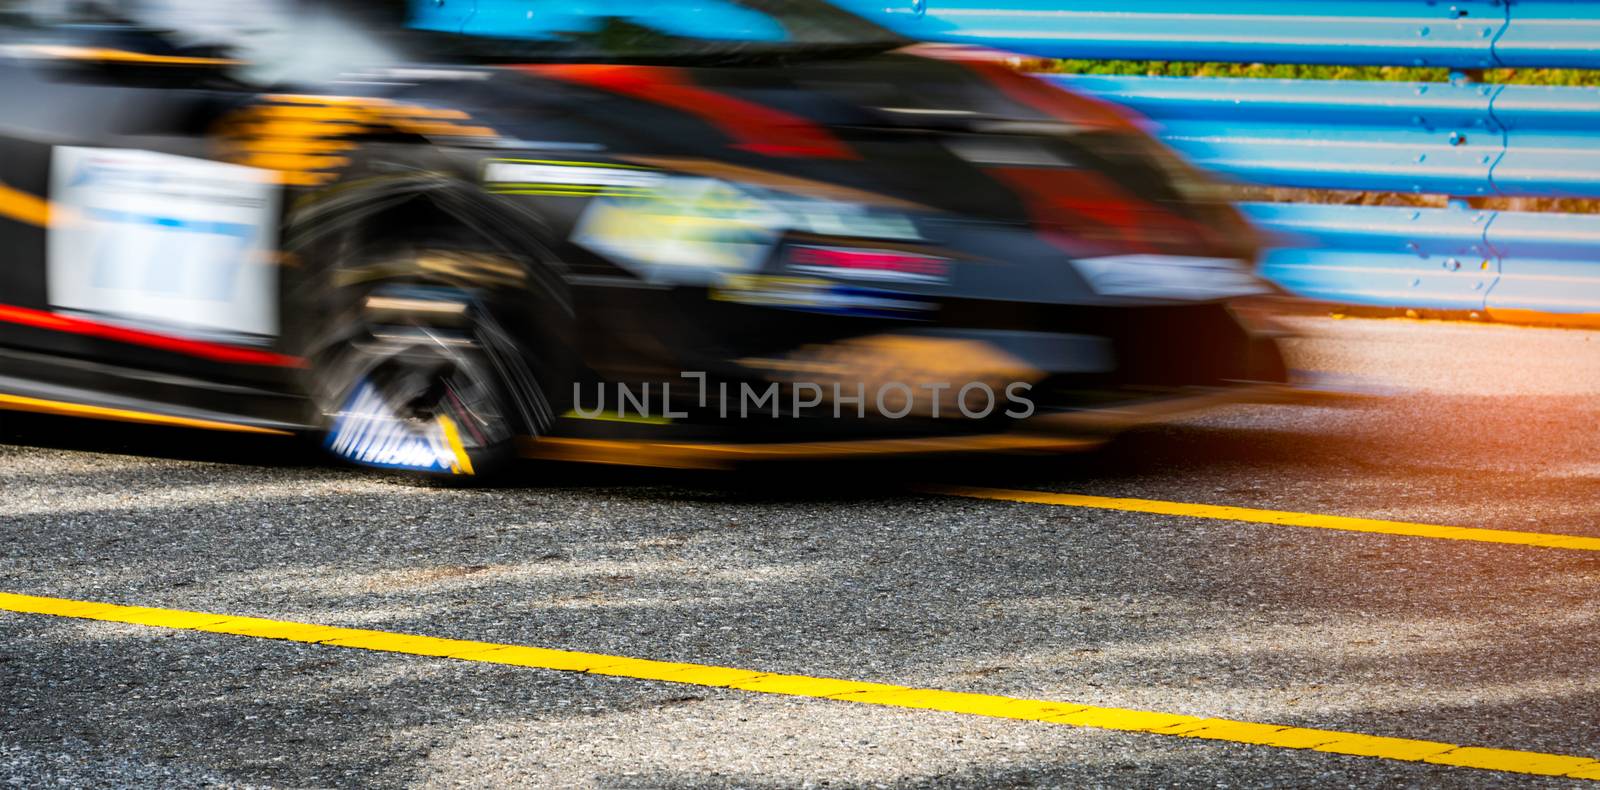 Motor sport car racing on asphalt road with blue fence and yellow line traffic sign. Car with fast speed driving and motion blurred. Black racing car with red and yellow stripes. Car on racetrack.